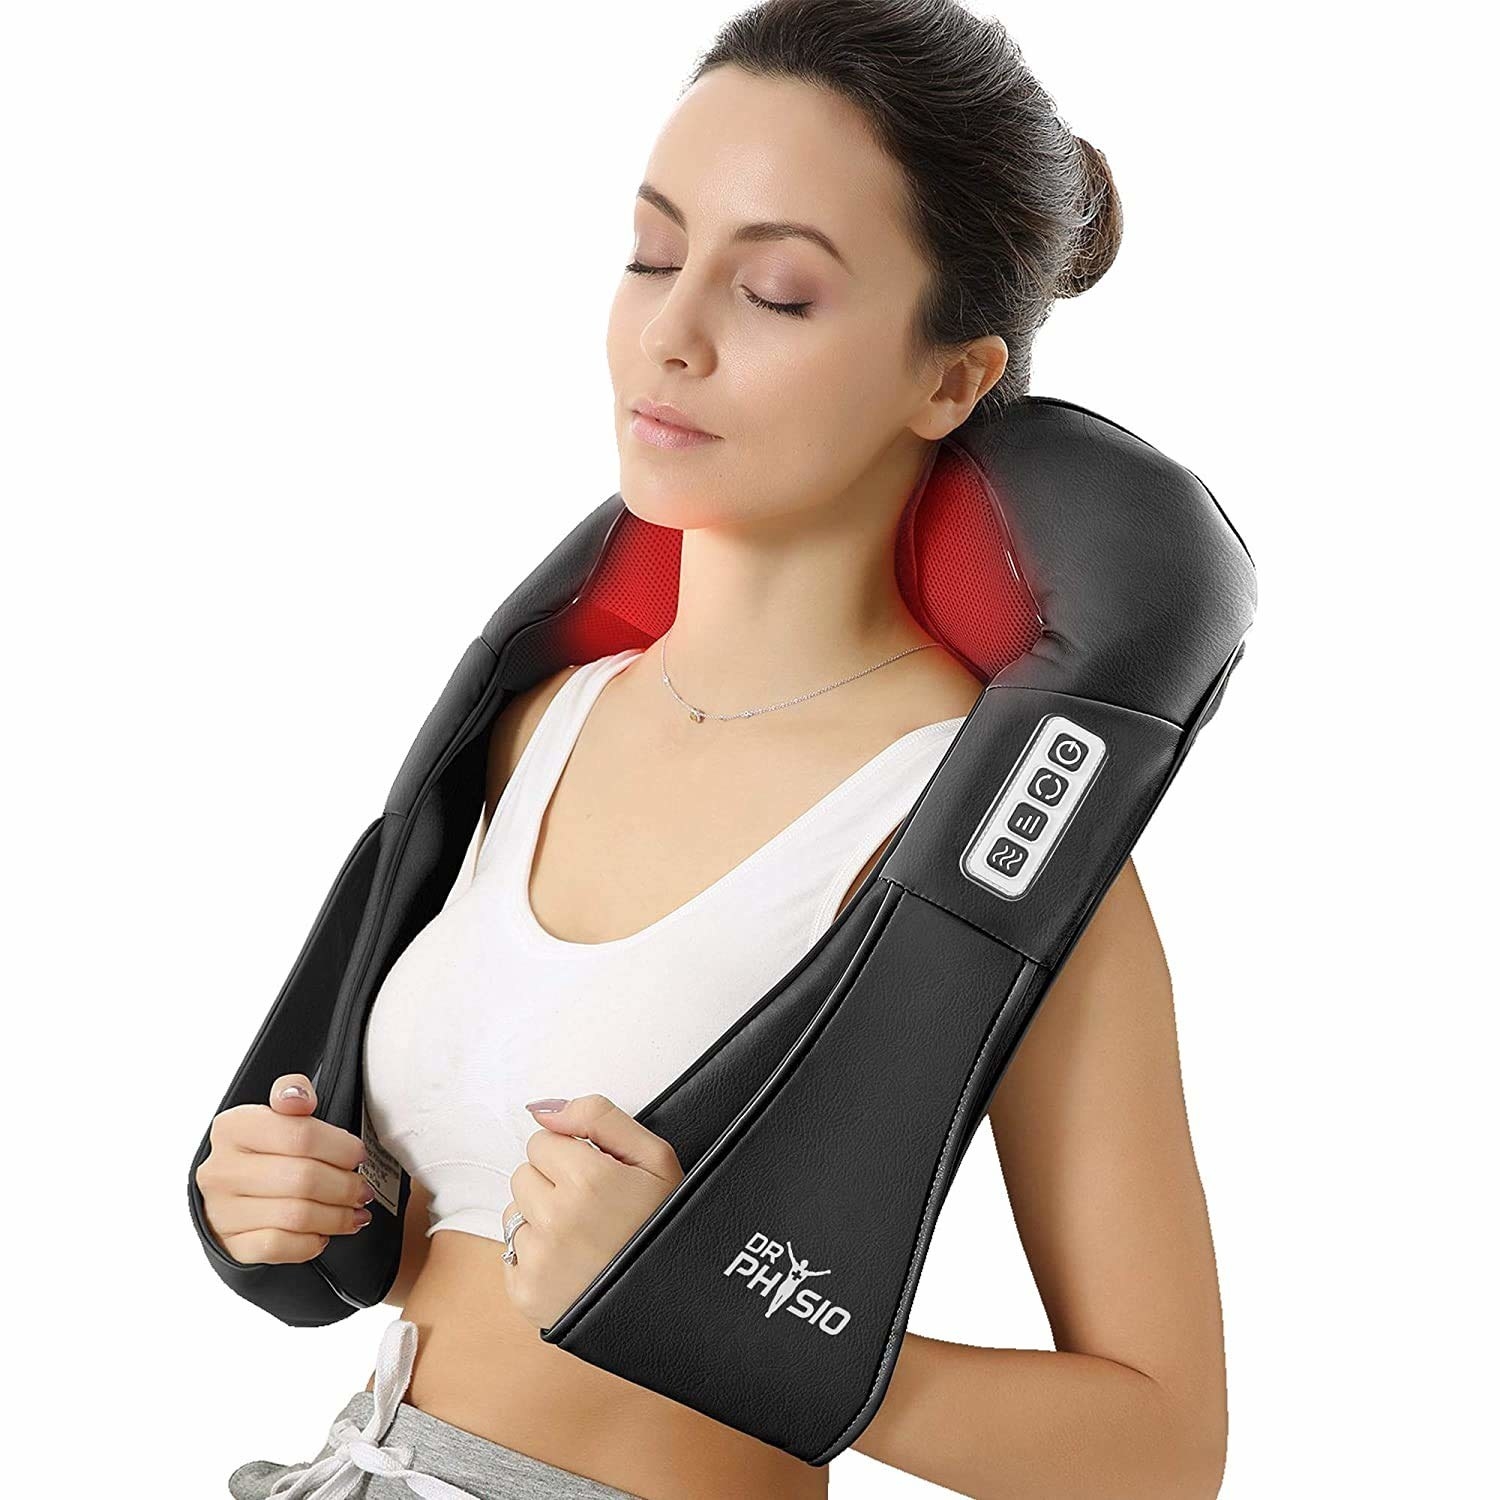 A woman using the massager.